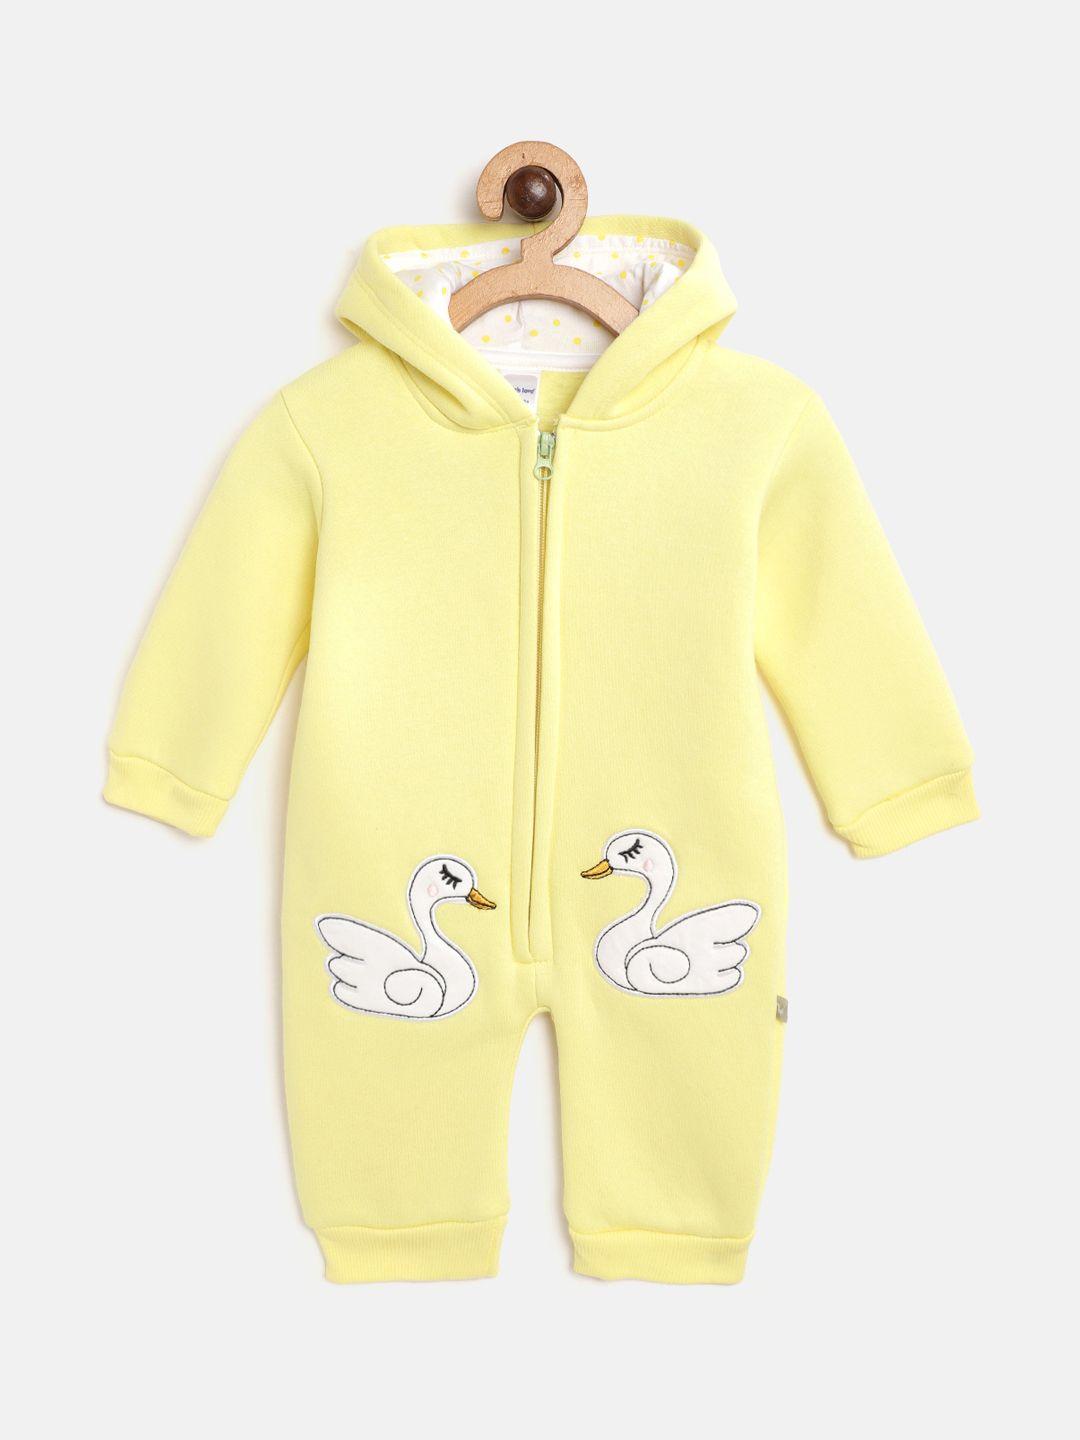 moms-love-infant-girls-yellow-solid-cotton-hooded-rompers